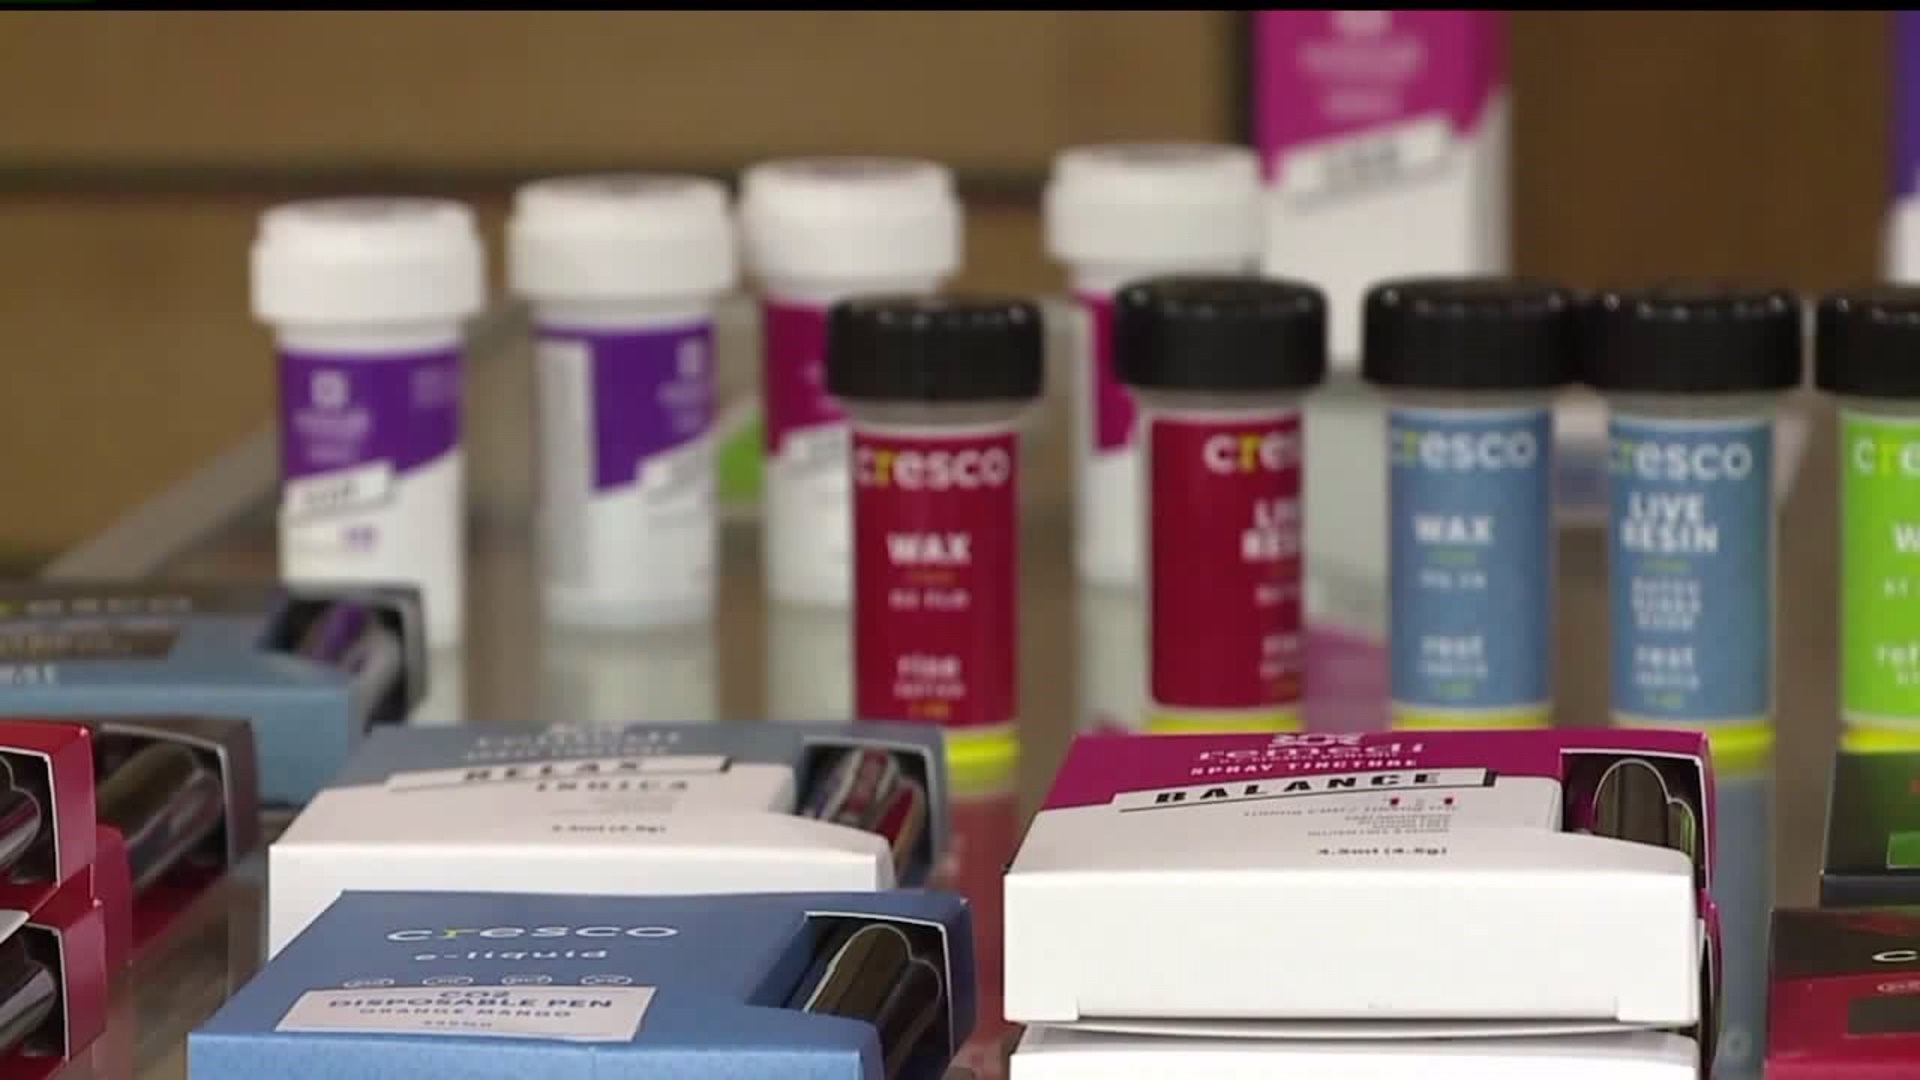 A new form of medical marijuana will be available for patients across Pennsylvania